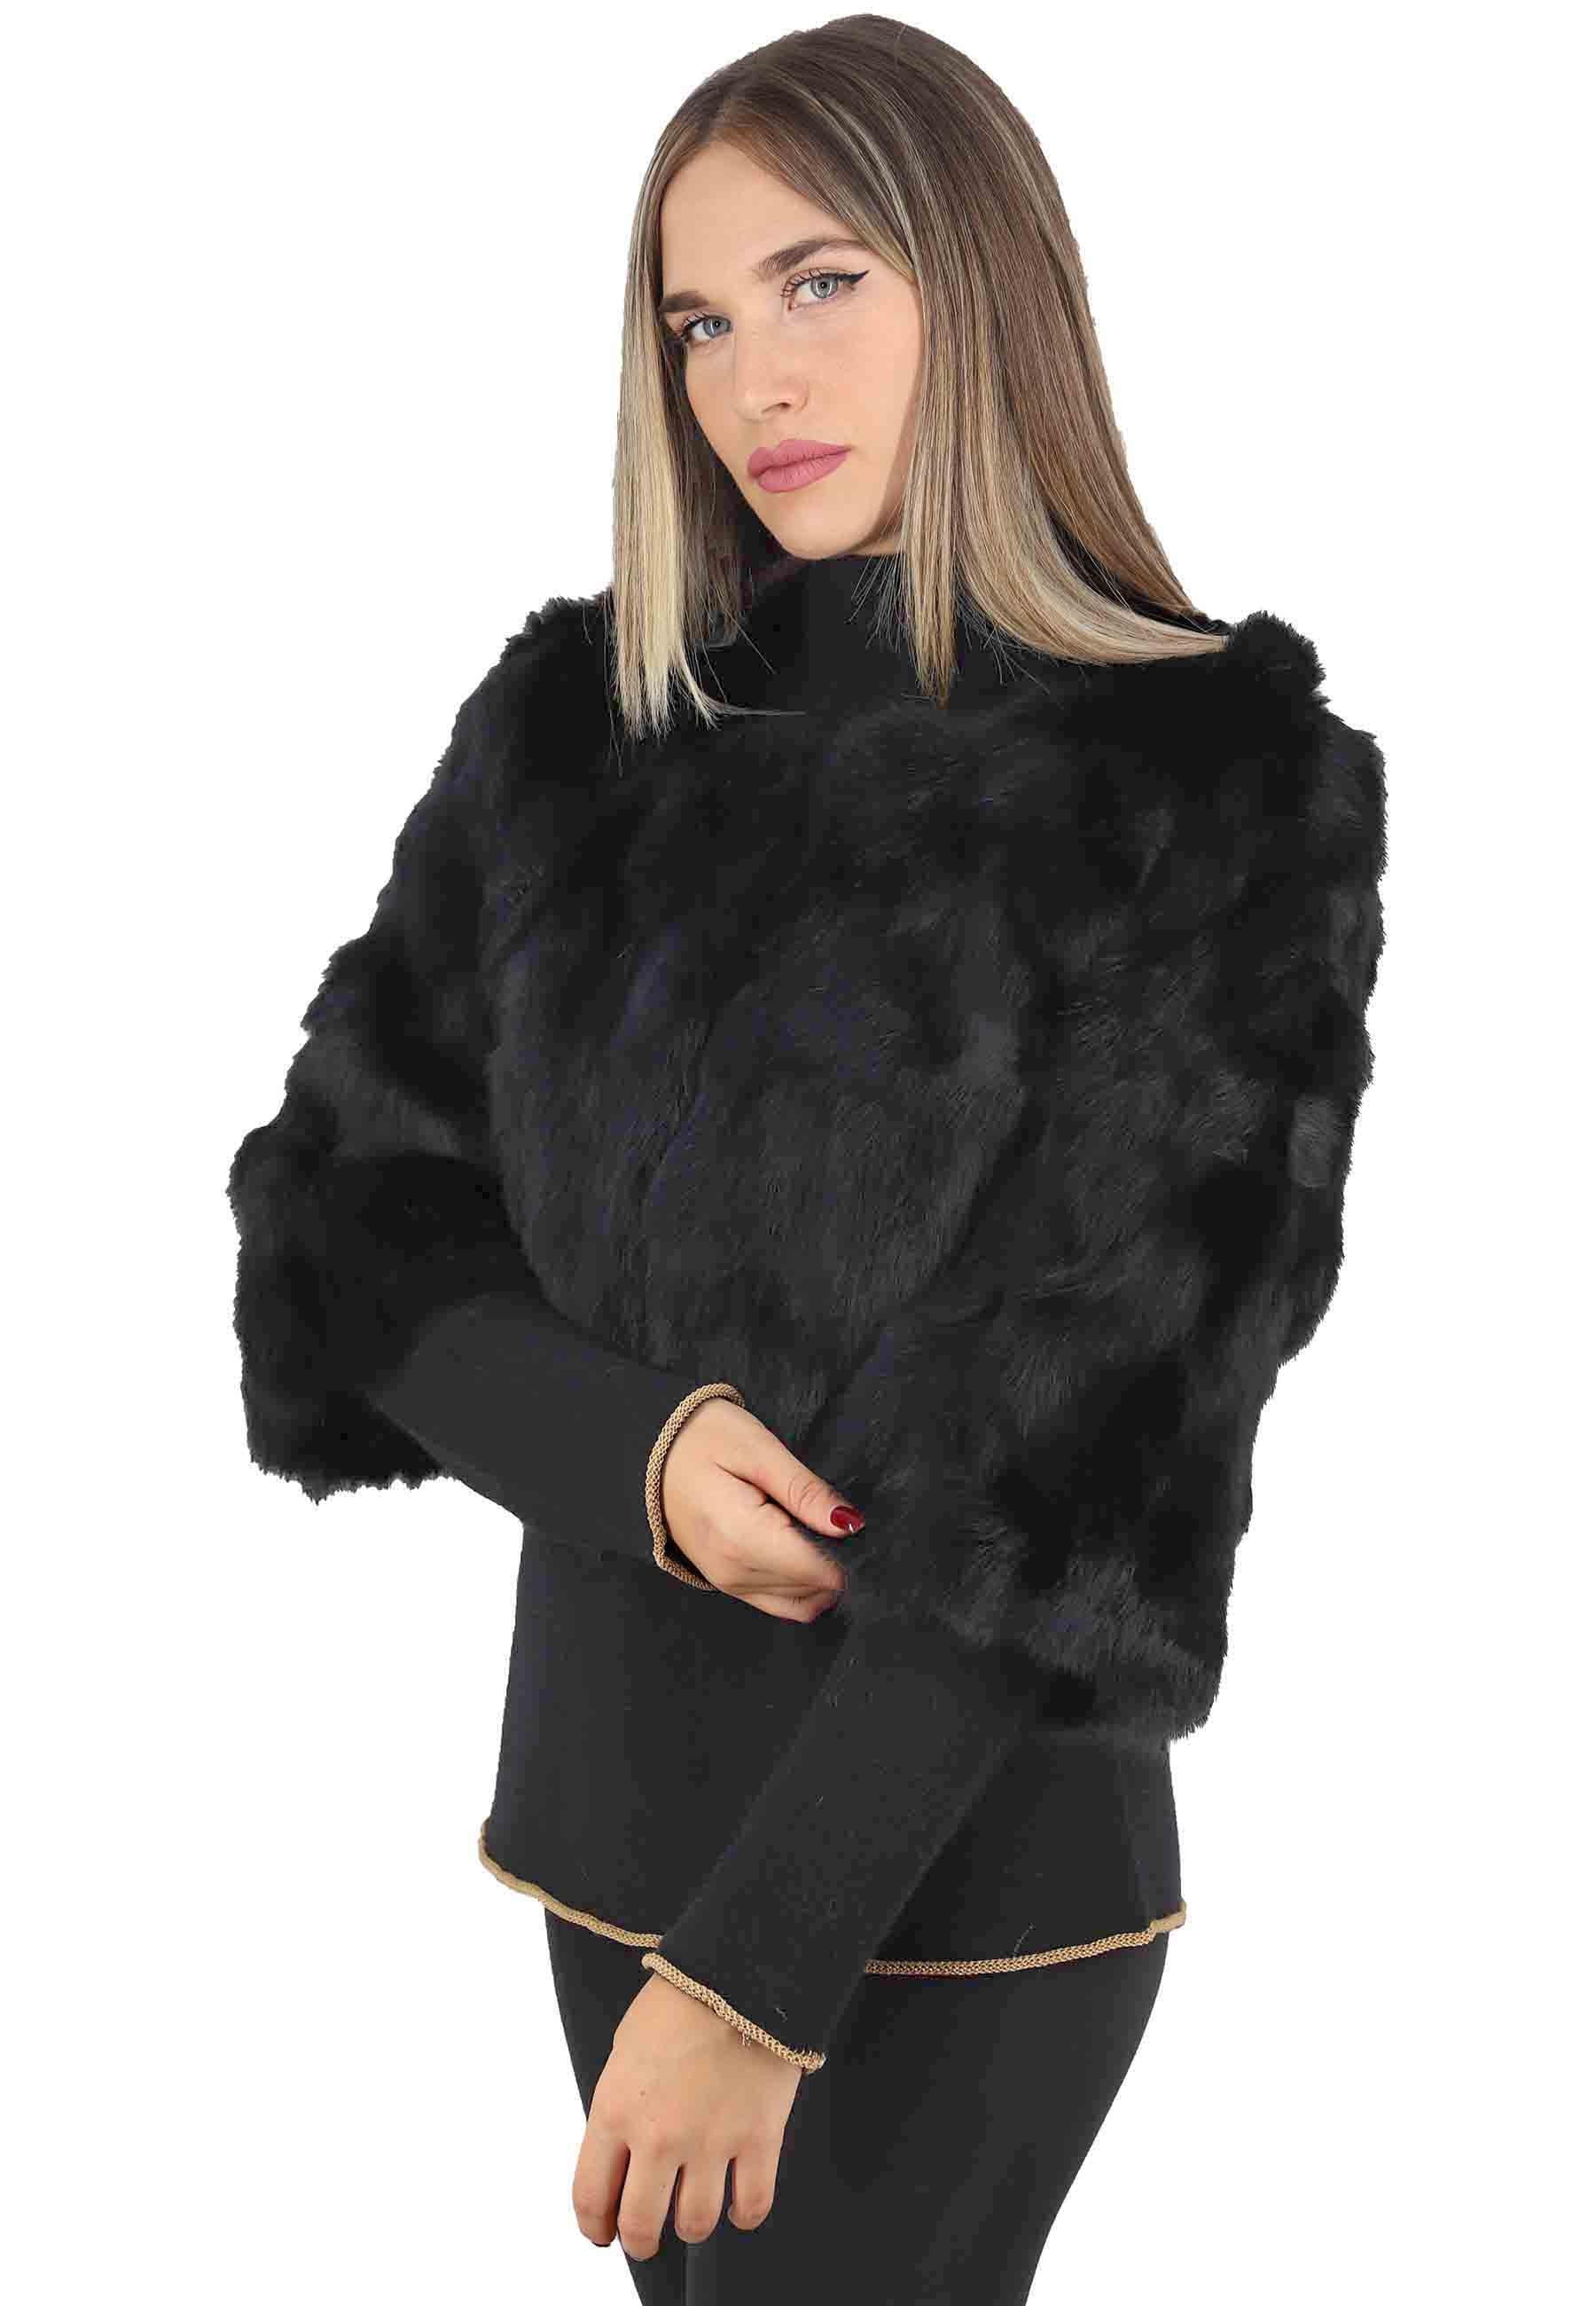 Women's black lapin jackets with crew neck